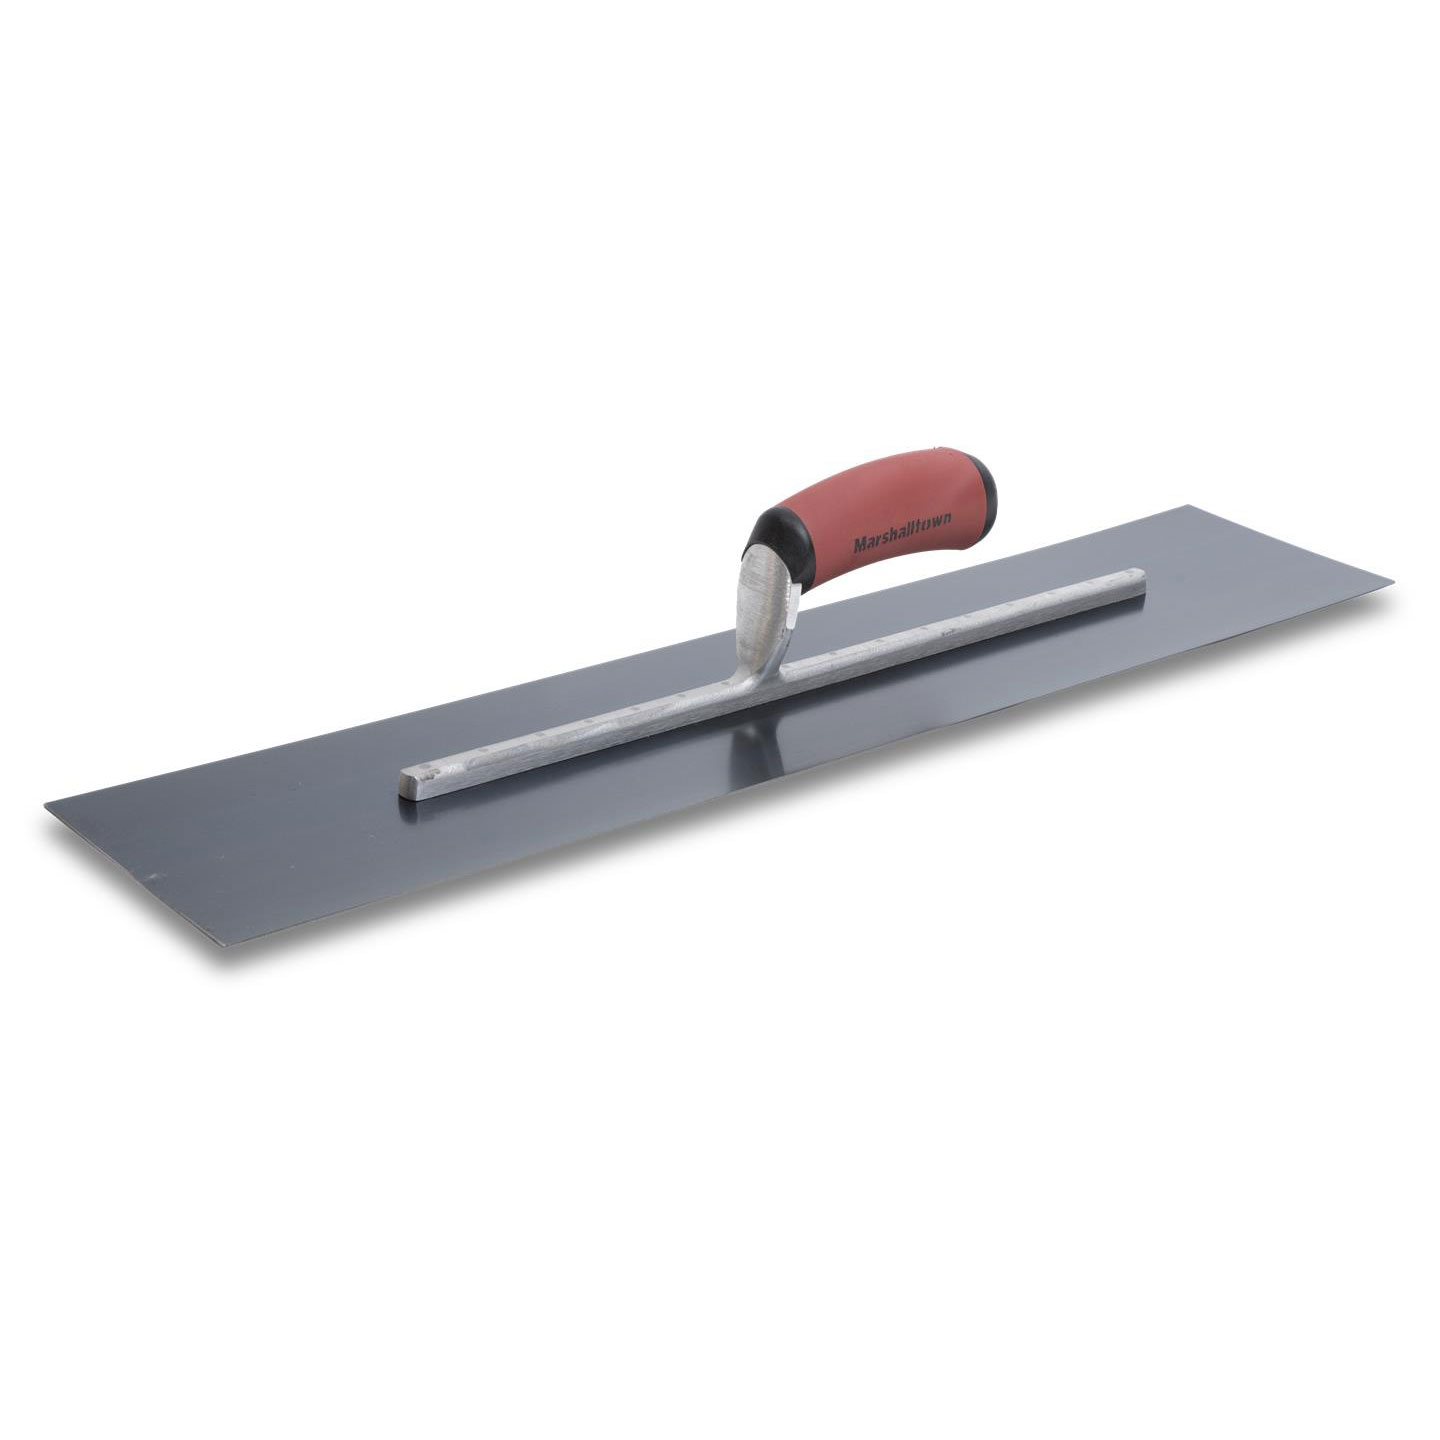 Marshalltown MXS145BD 14in x 5in Blue Steel Finishing Trowel with Curved DuraSoft Handle MXS145BD